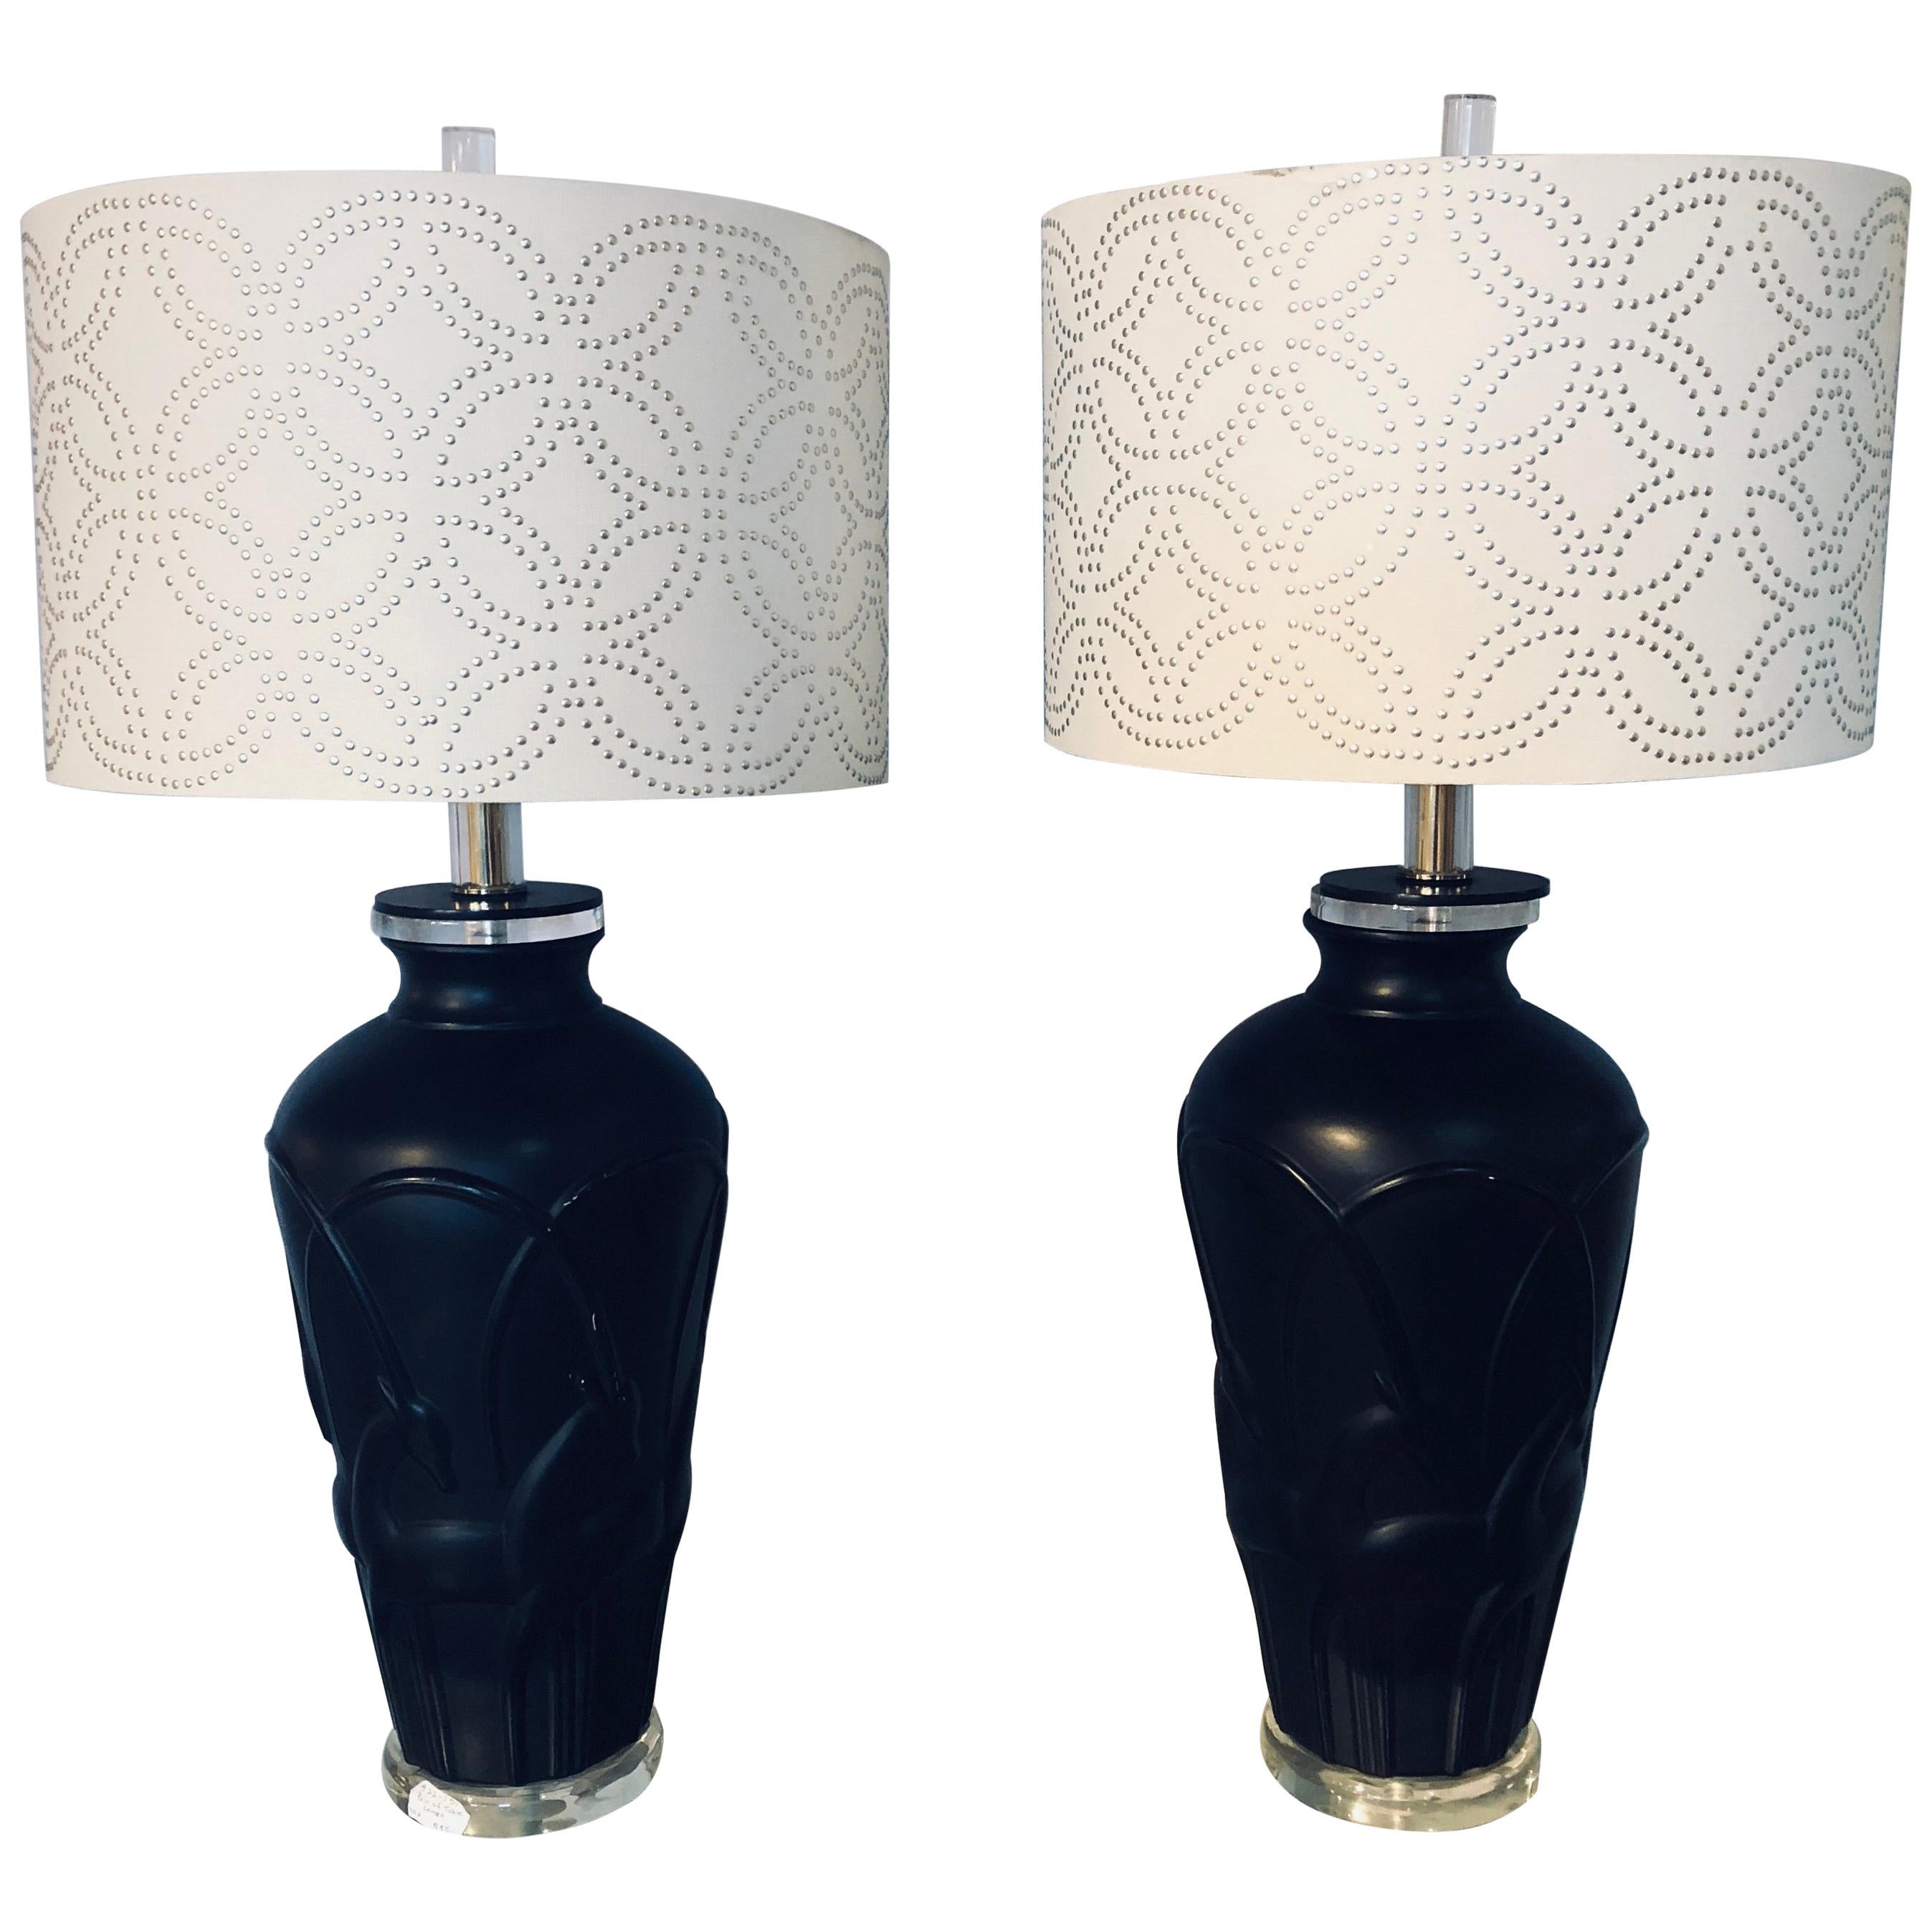 Pair of Art Deco style modern black table lamps Lucite base and Antelopes on the bodies. Each having a custom lamp shape with button form. Measures: Lampshades 10 inches high x 16 inches wide.